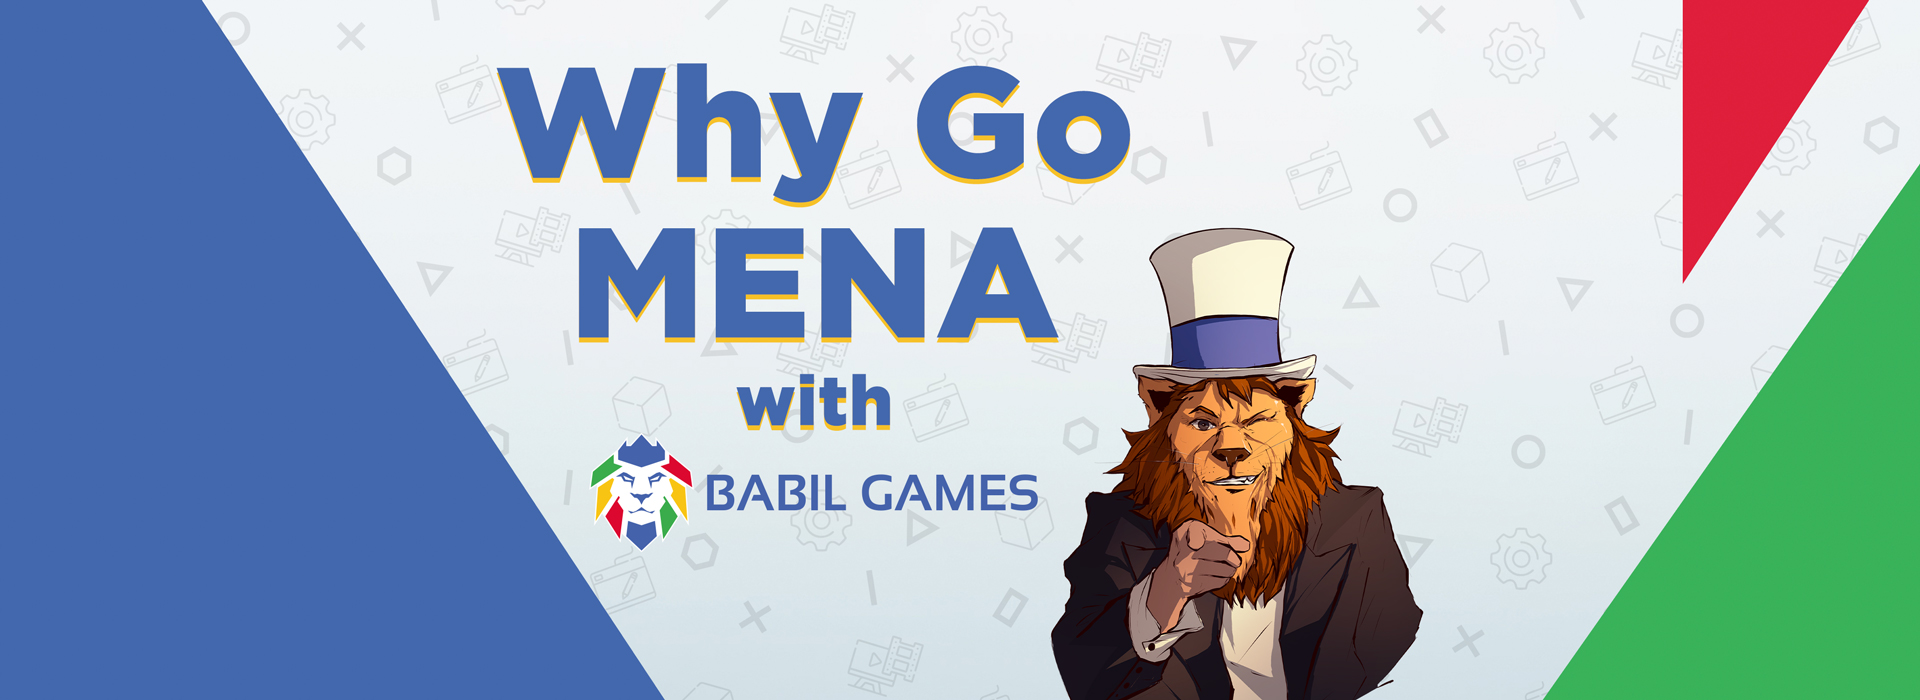 WHY-GO-MENA-WITH-BABIL-GAMES